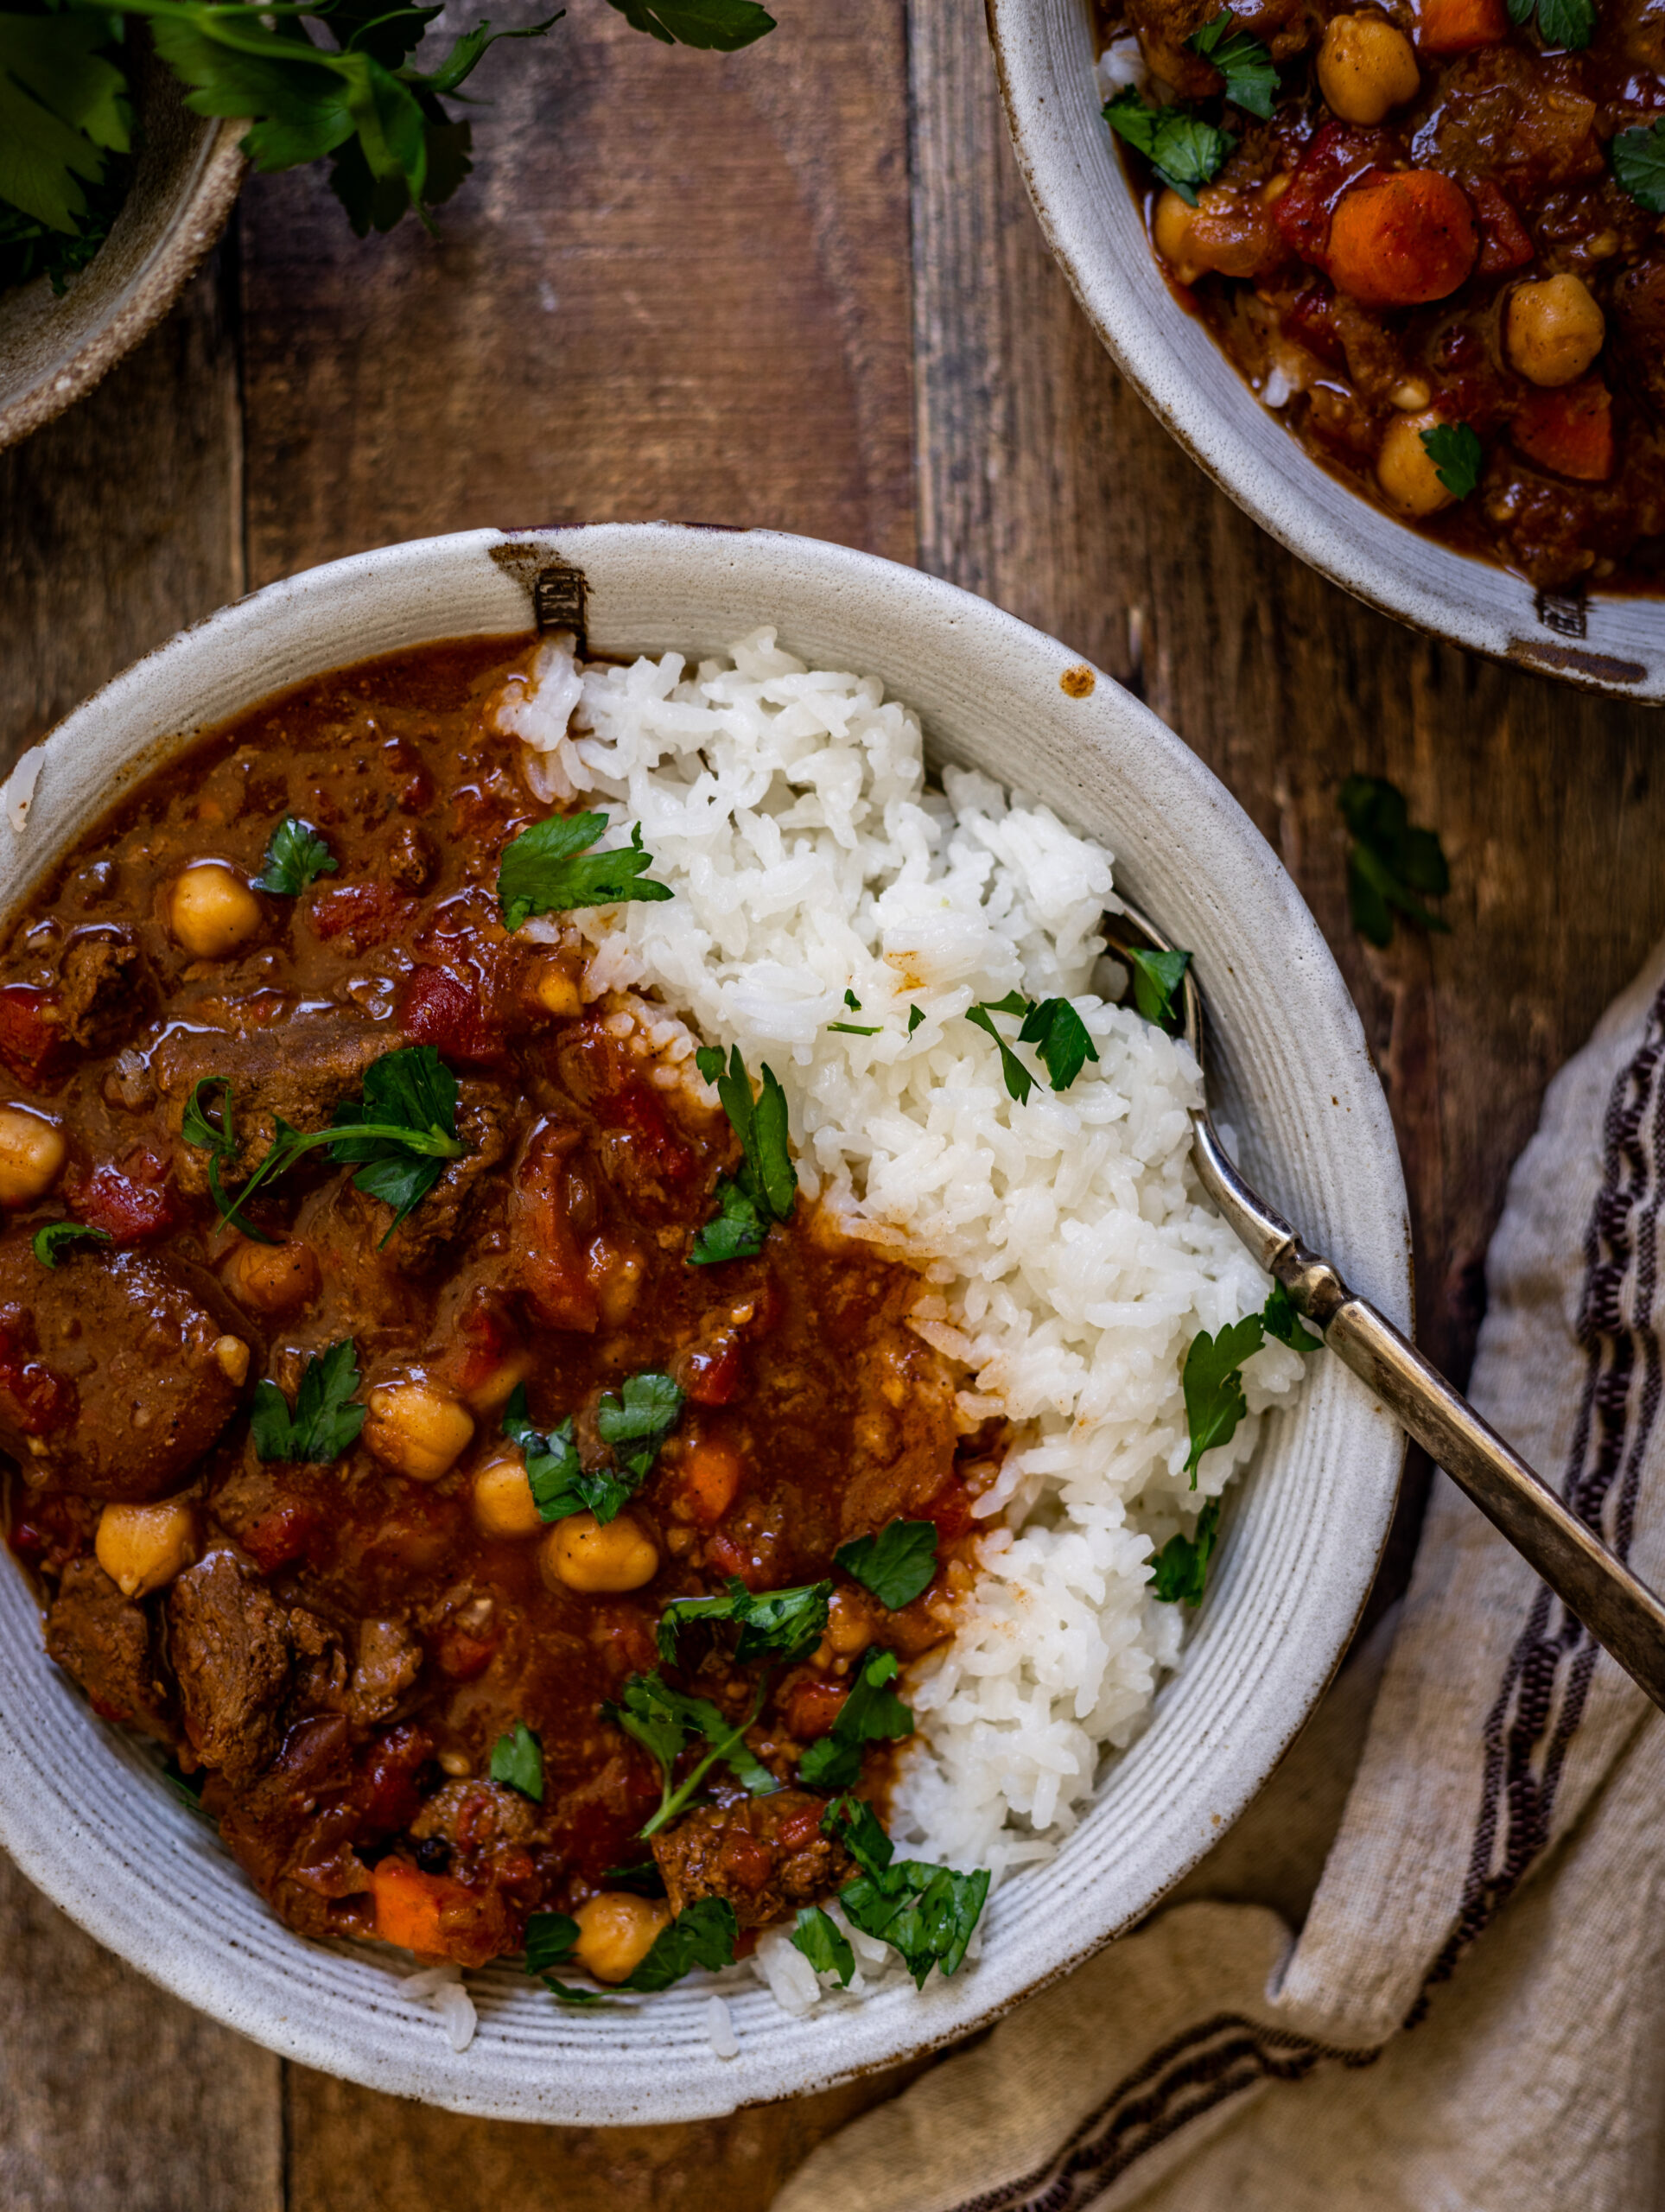 Moroccan lamb stew filled with chickpeas, tender lamb, diced tomatoes, and dried apricots.